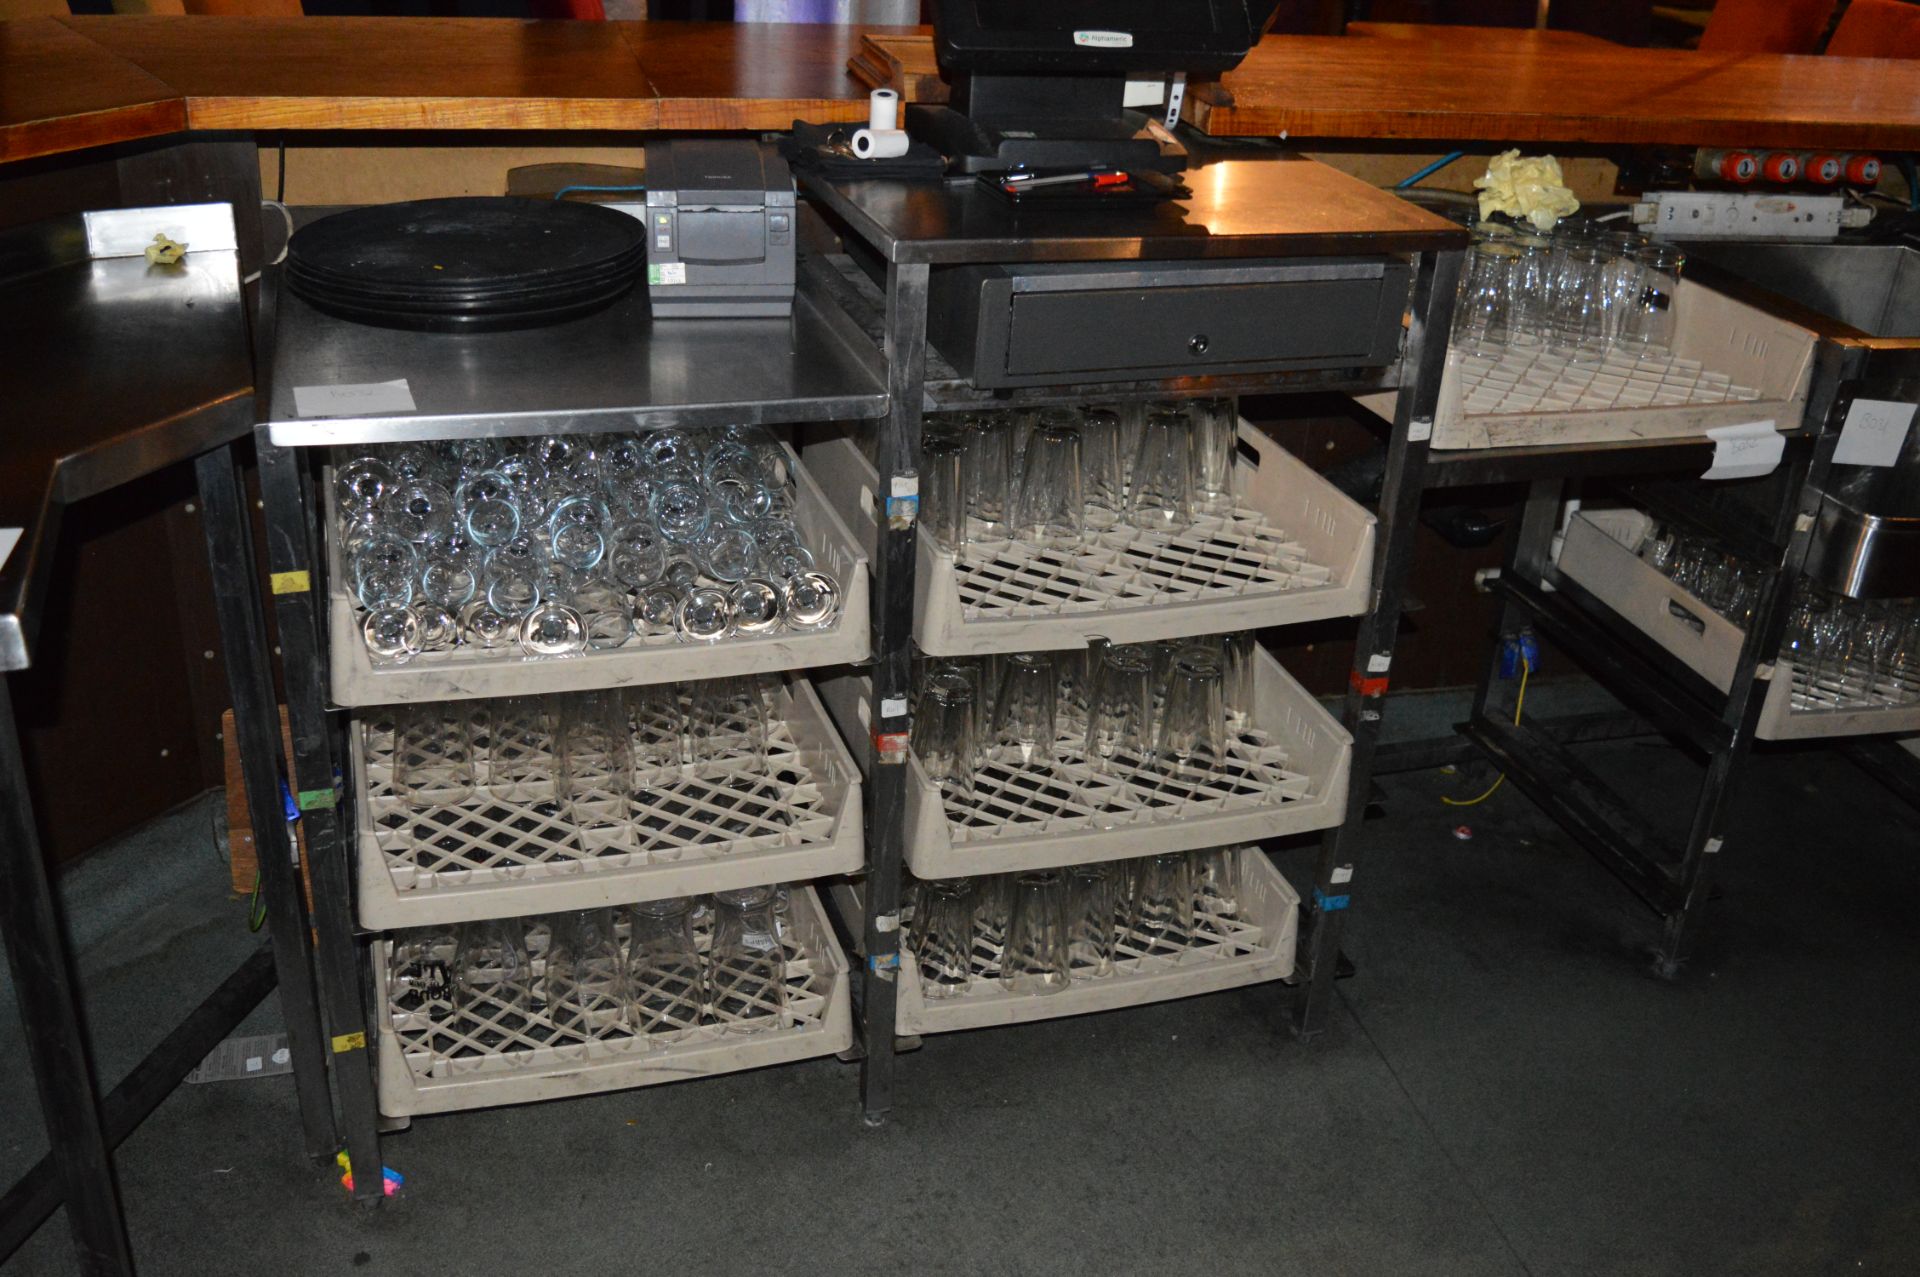 1 x Stainless Steel Workstation For Behind Bars - 8 Pint Pot Tray Capacity, POS Till Holder and an - Image 2 of 2